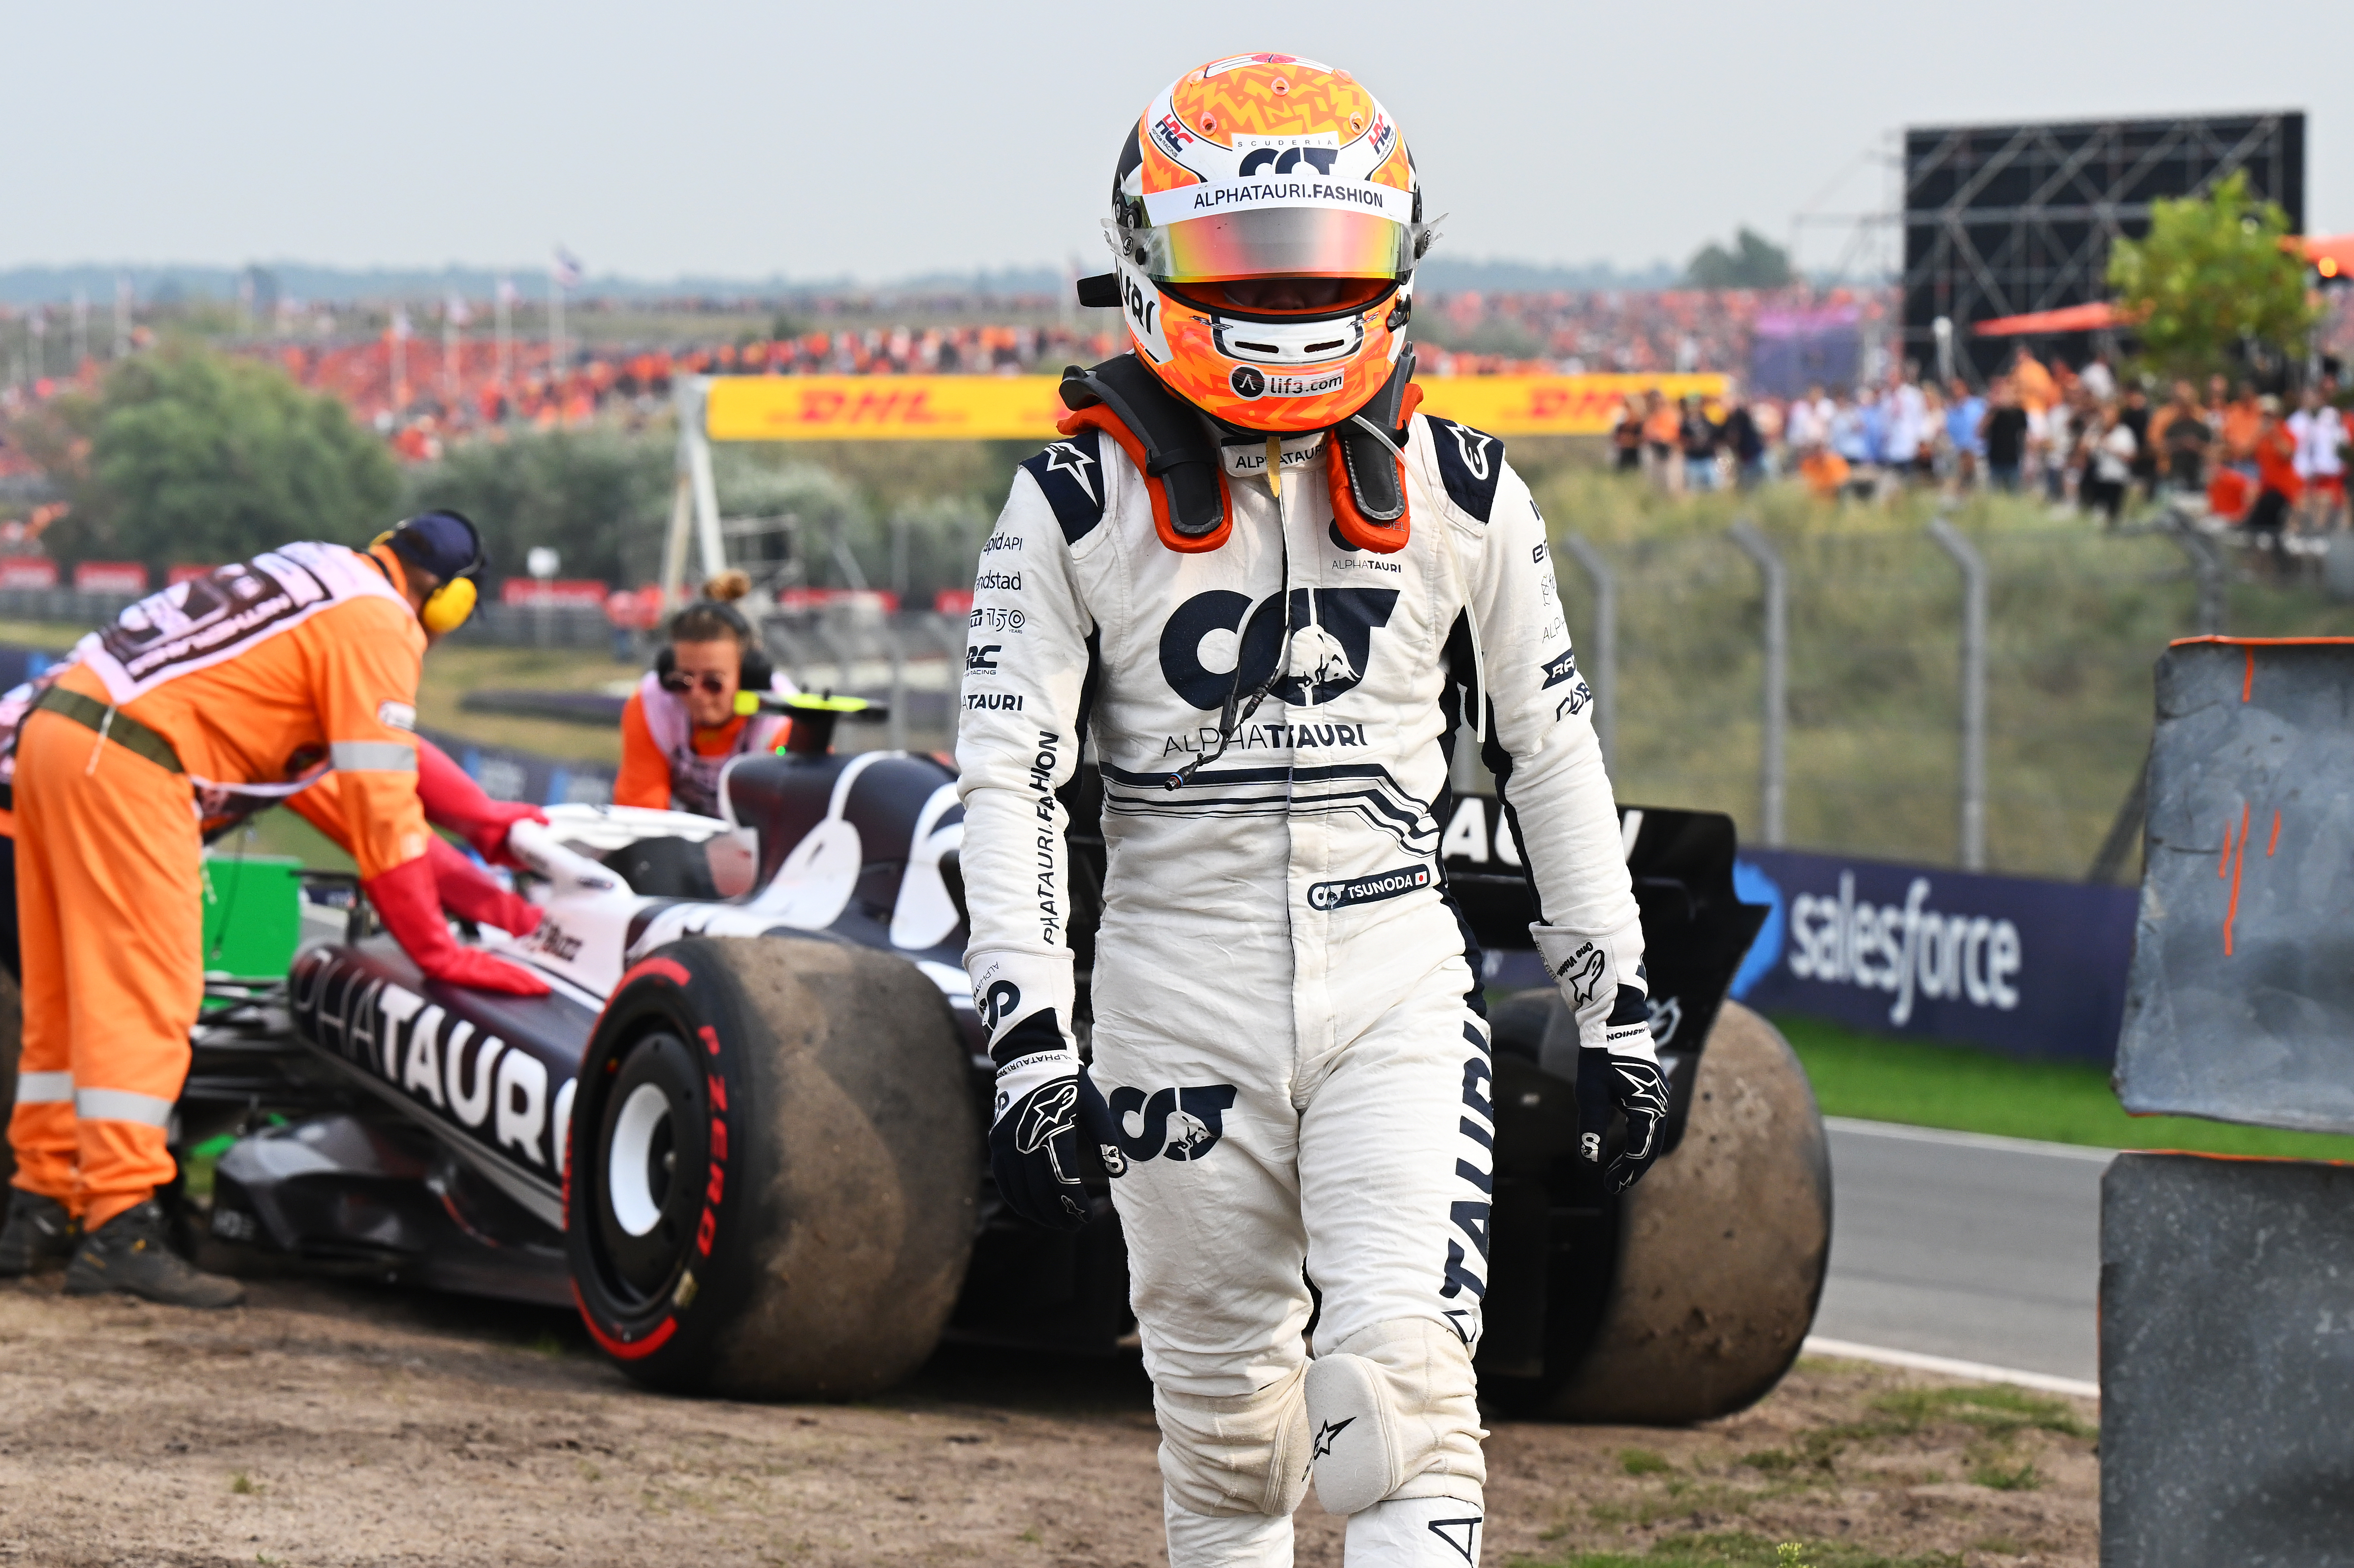 Yuki Tsunoda of Japan and Scuderia AlphaTauri looks on after stopping on track during the F1 Grand Prix of The Netherlands at Circuit Zandvoort on September 04, 2022 in Zandvoort, Netherlands. (Photo by Clive Mason/Getty Images)